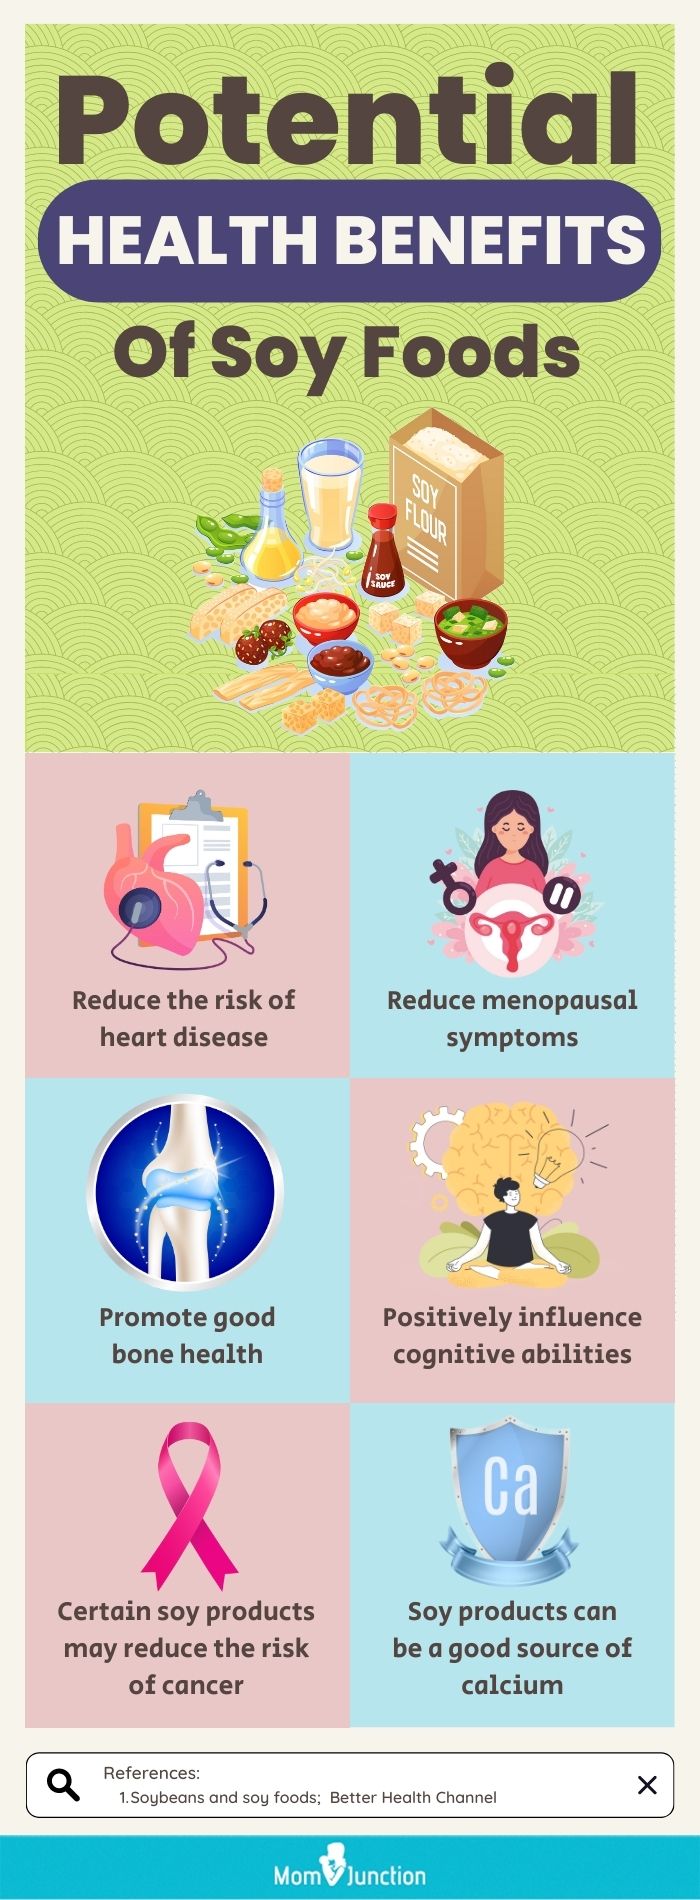 Potential Health Benefits Of Soy Foods (infographic)